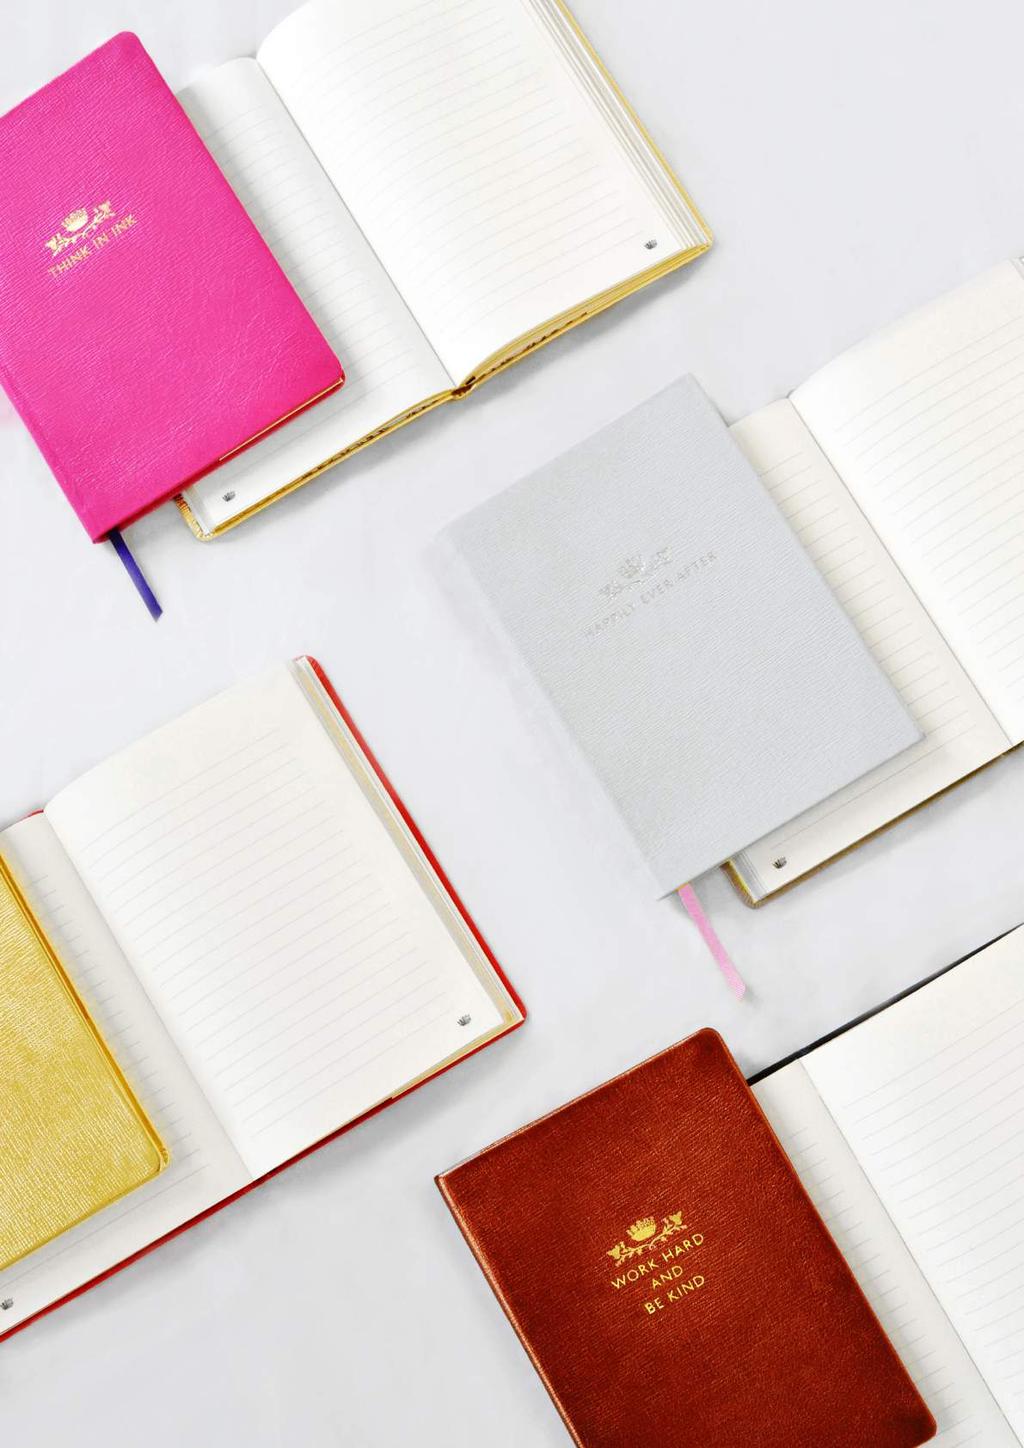 LEATHER NOTEBOOKS DEBRETT S 2018 COLLECTION LEATHER NOTEBOOKS Each of our notebooks reflects Debrett s heritage in design and expertise.